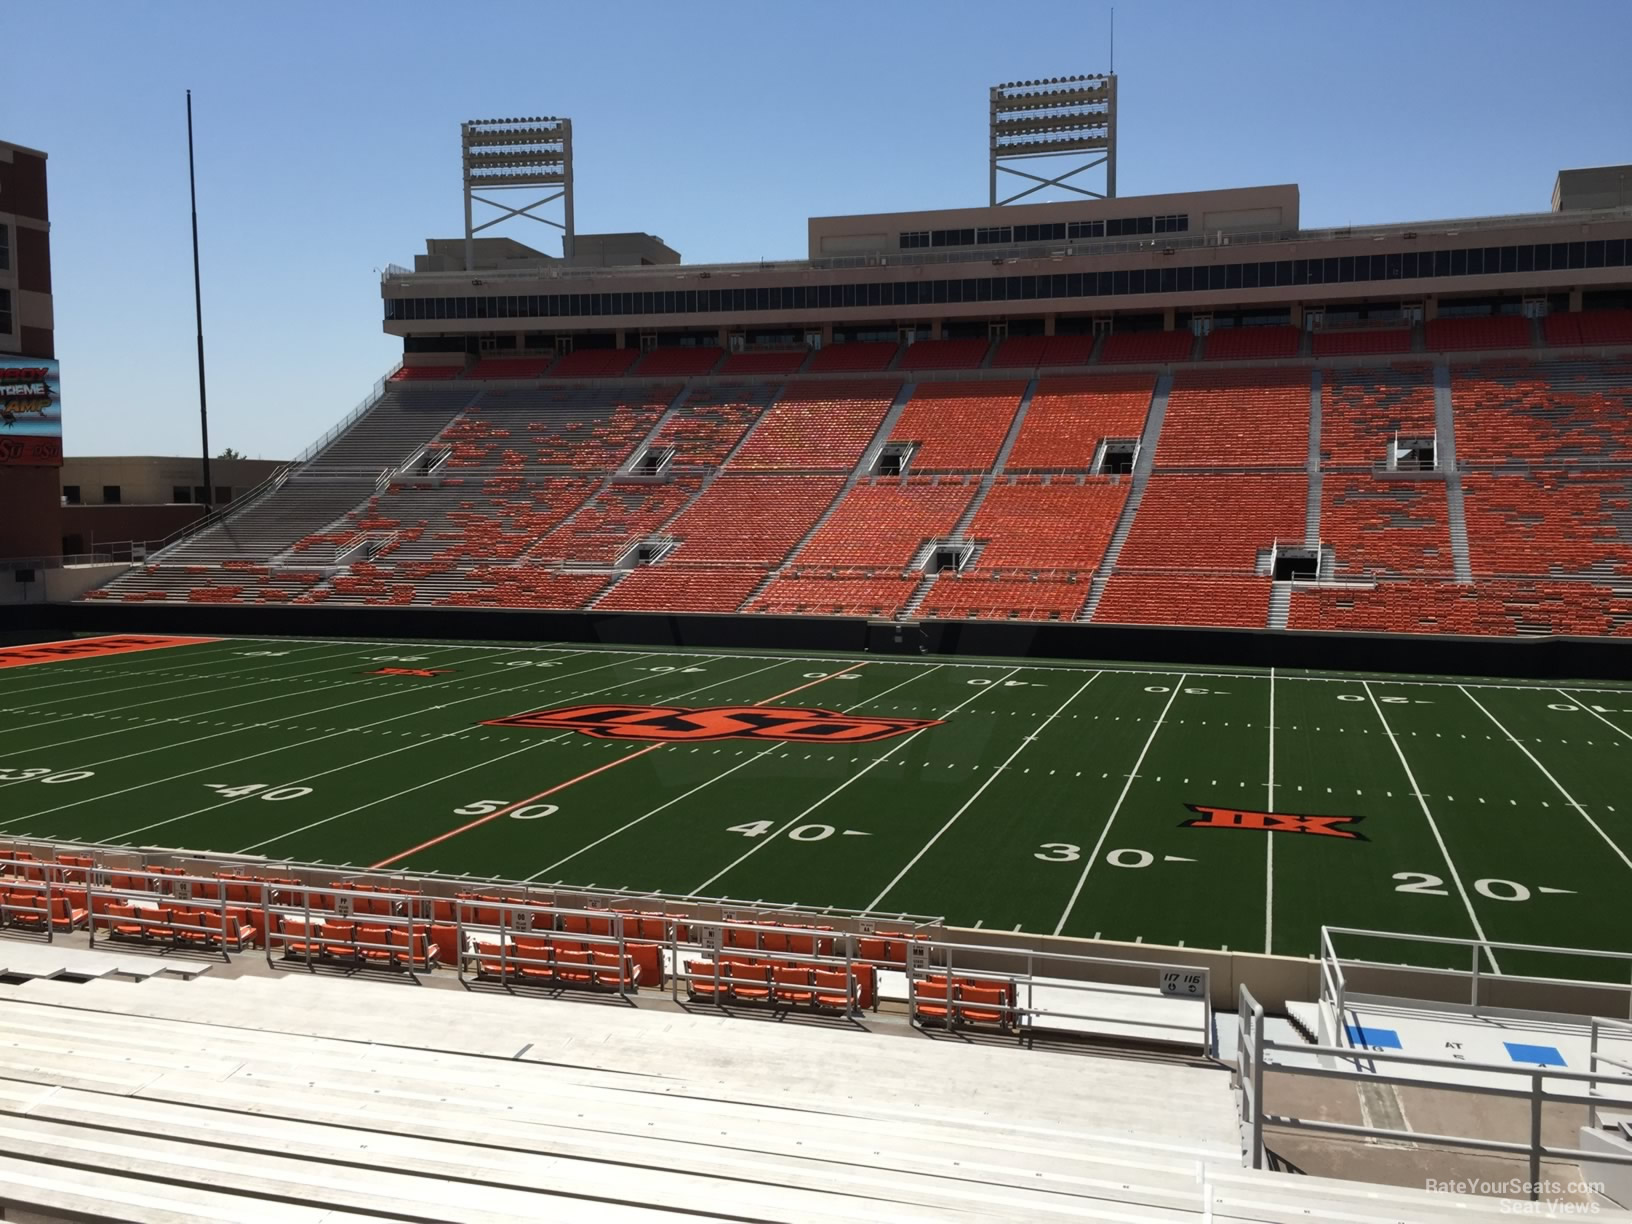 section 224, row 20 seat view  - boone pickens stadium